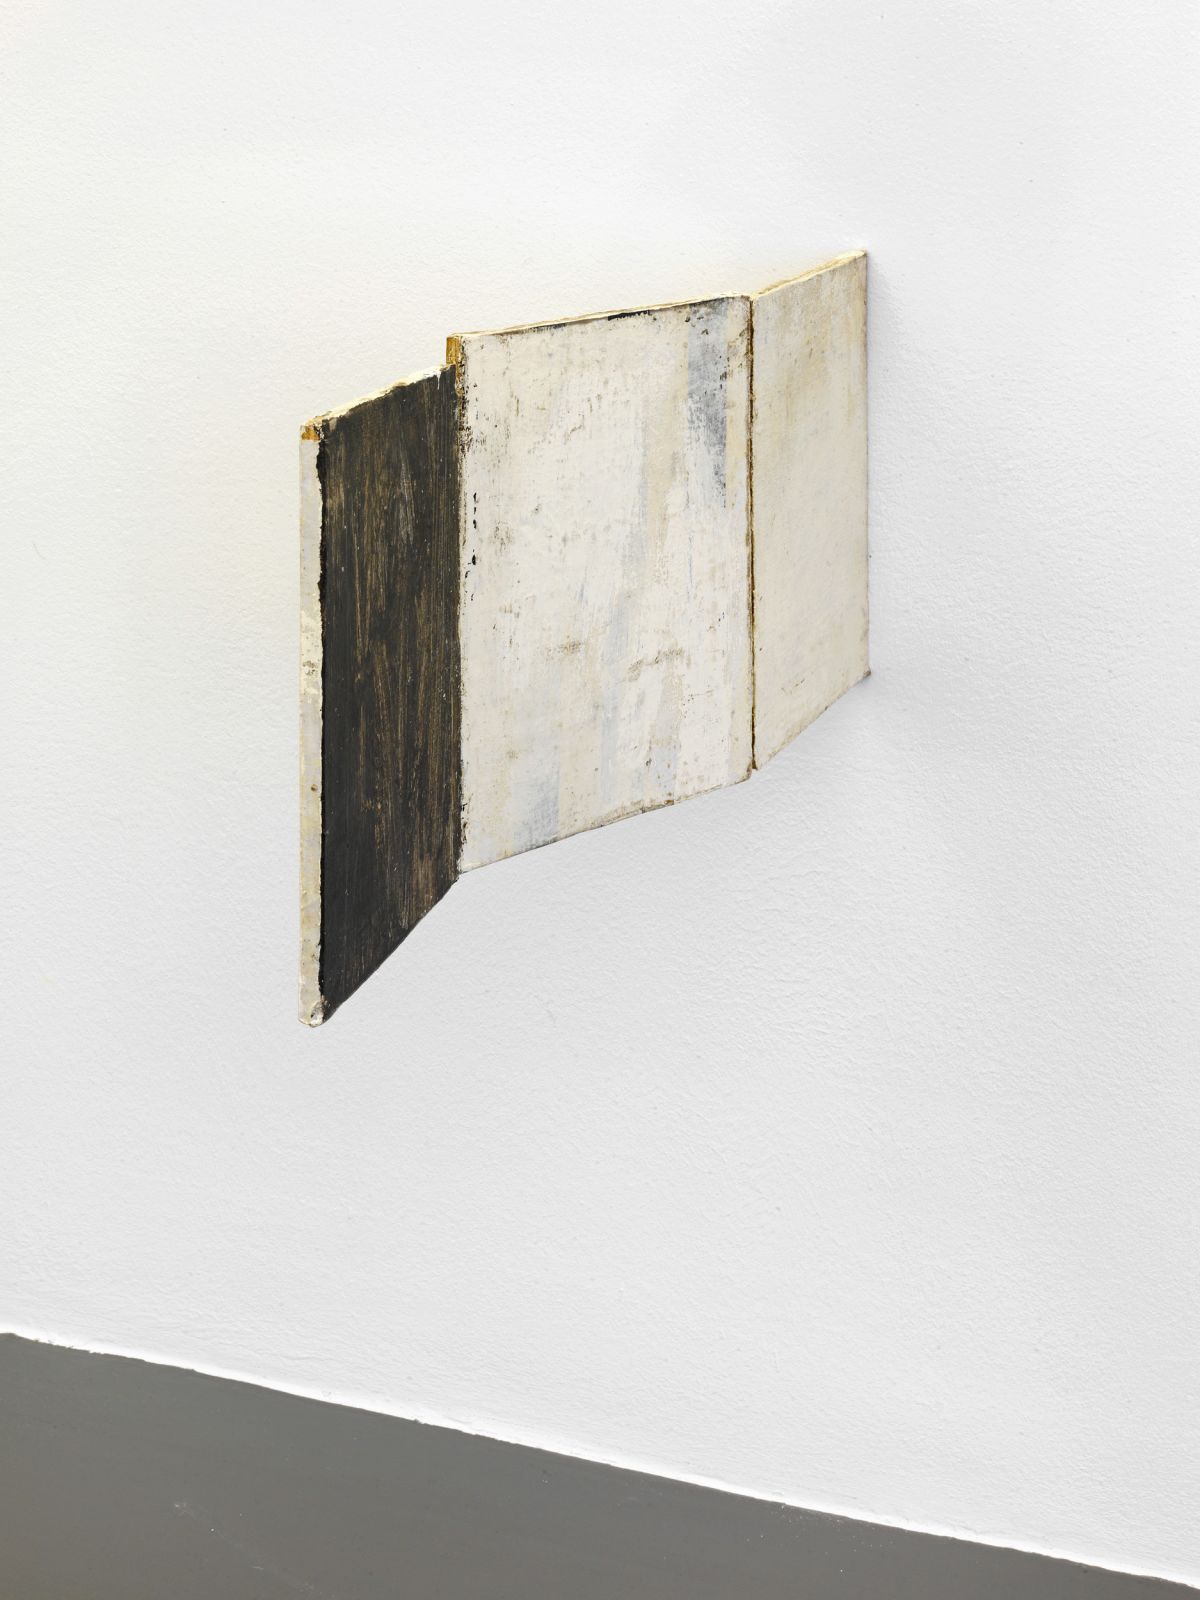 Lawrence Carroll, ‘Untitled (hinge painting)’, 2013, Oil and wax on canvas on wood